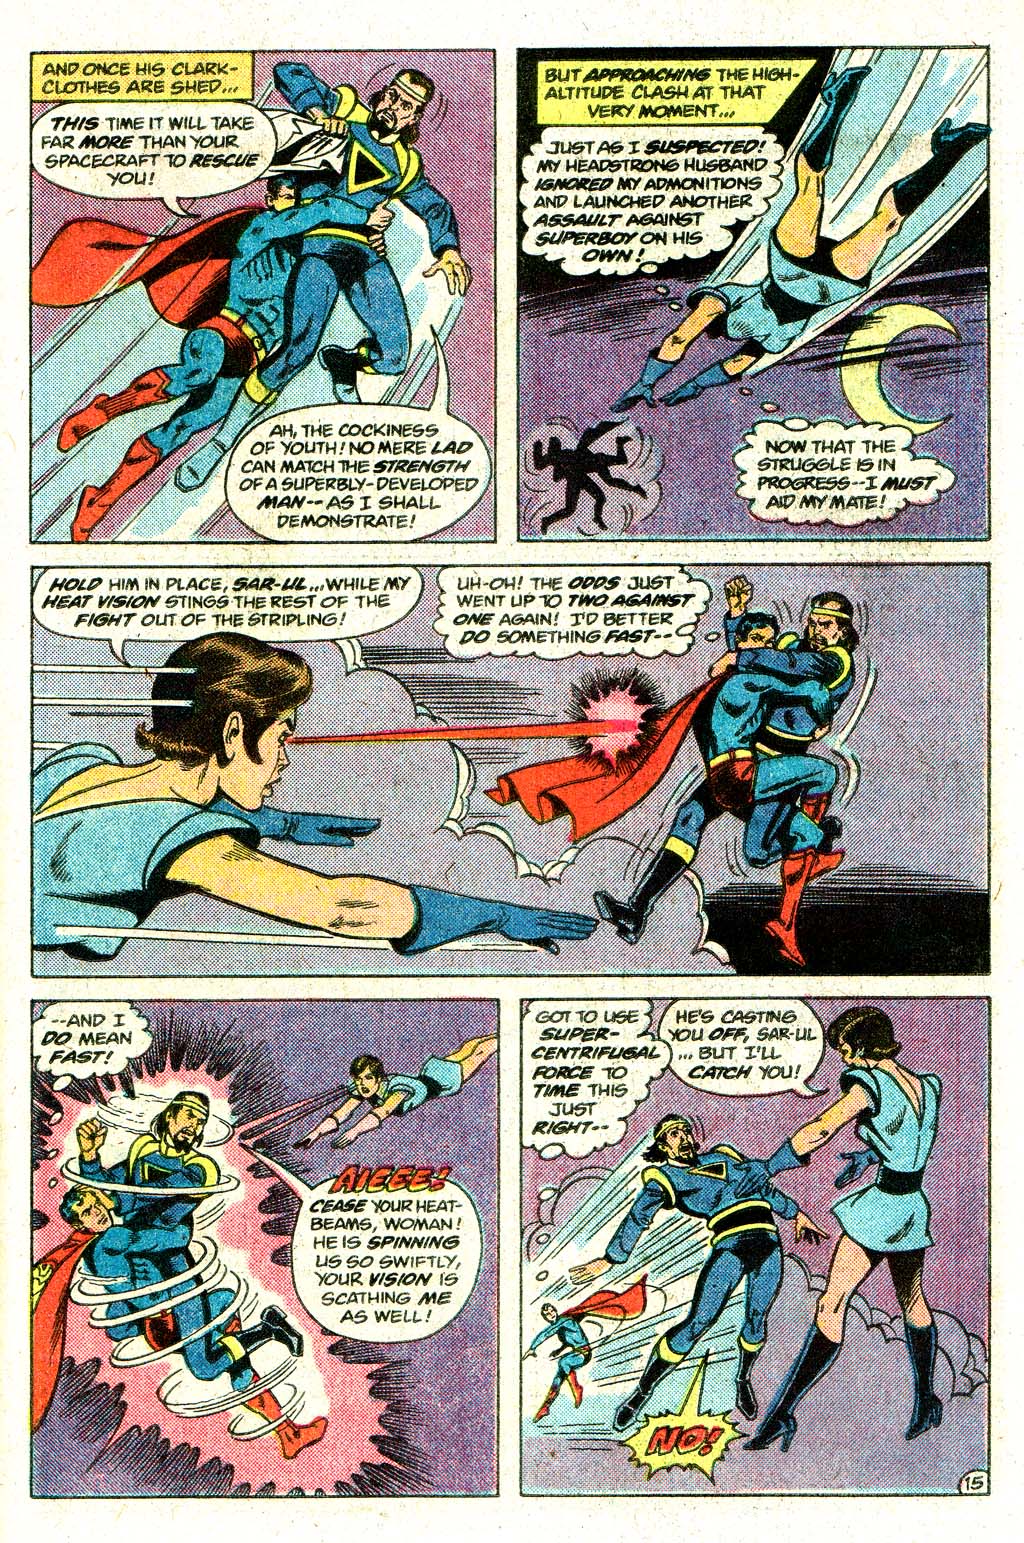 The New Adventures of Superboy 27 Page 18